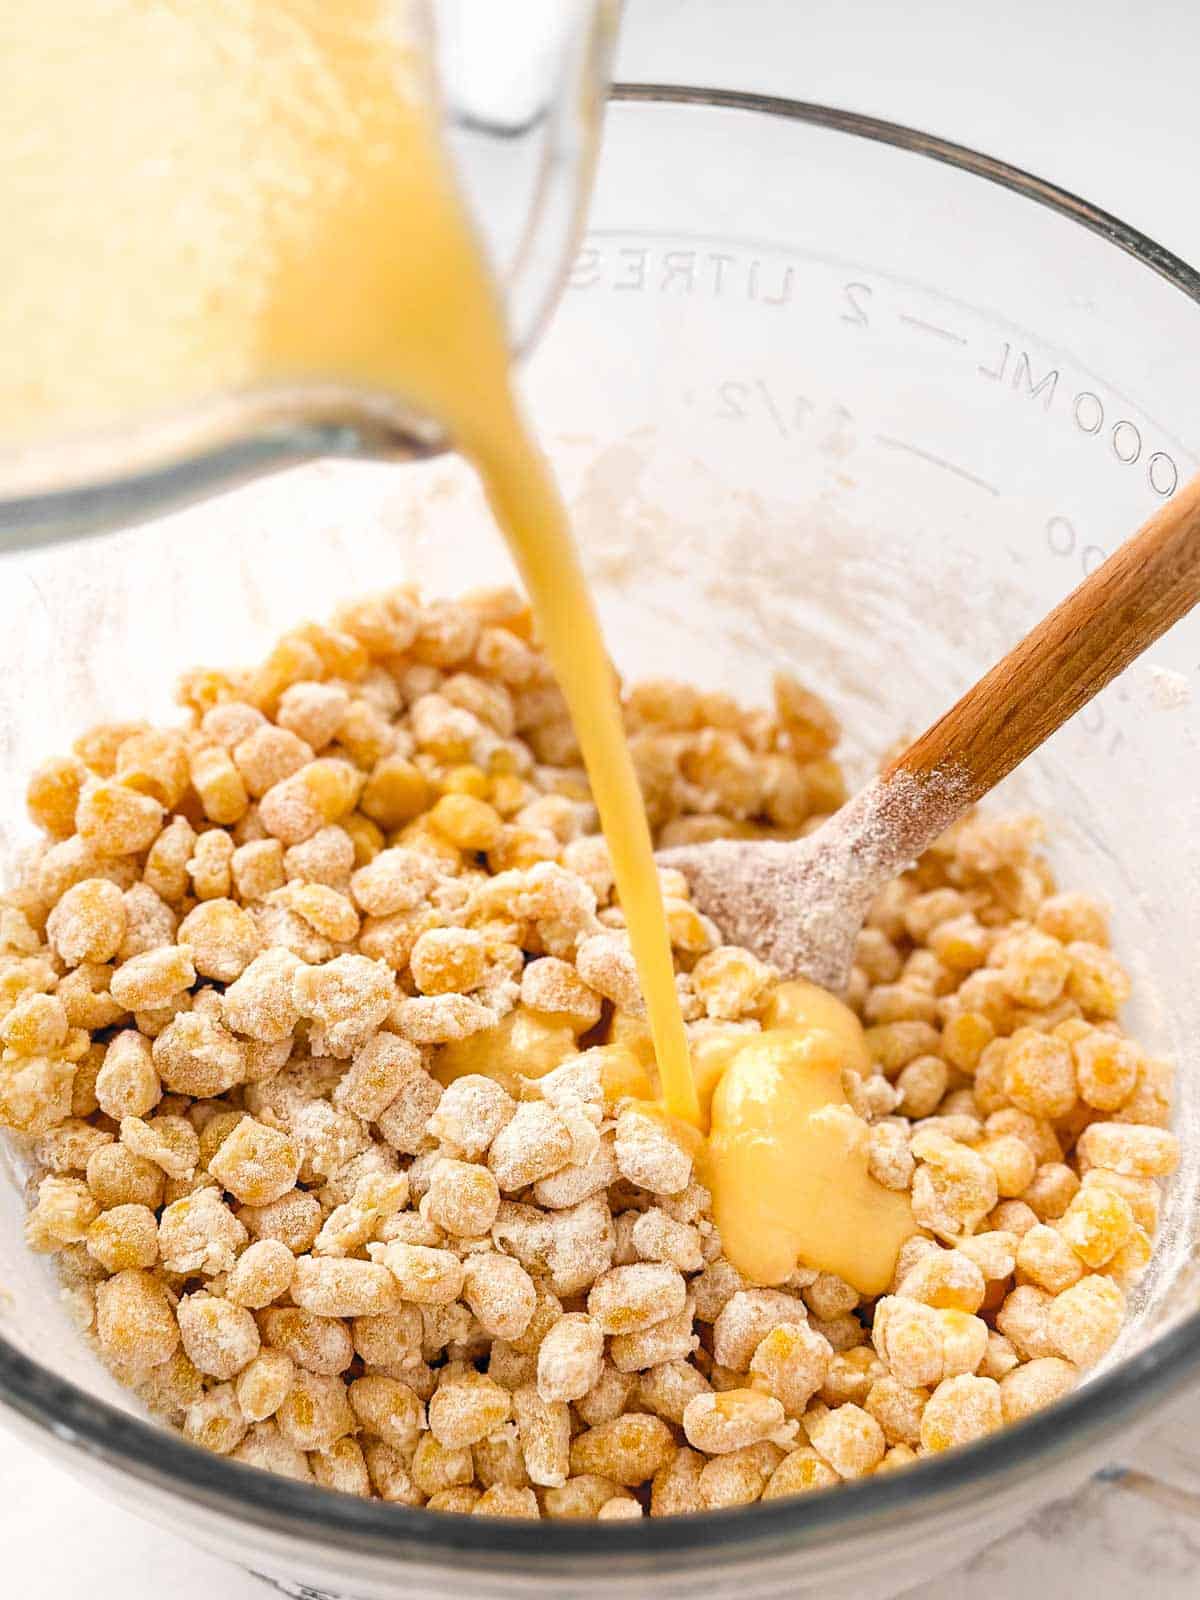 egg mixture pouring from glass measuring jug over flour coated corn kernels